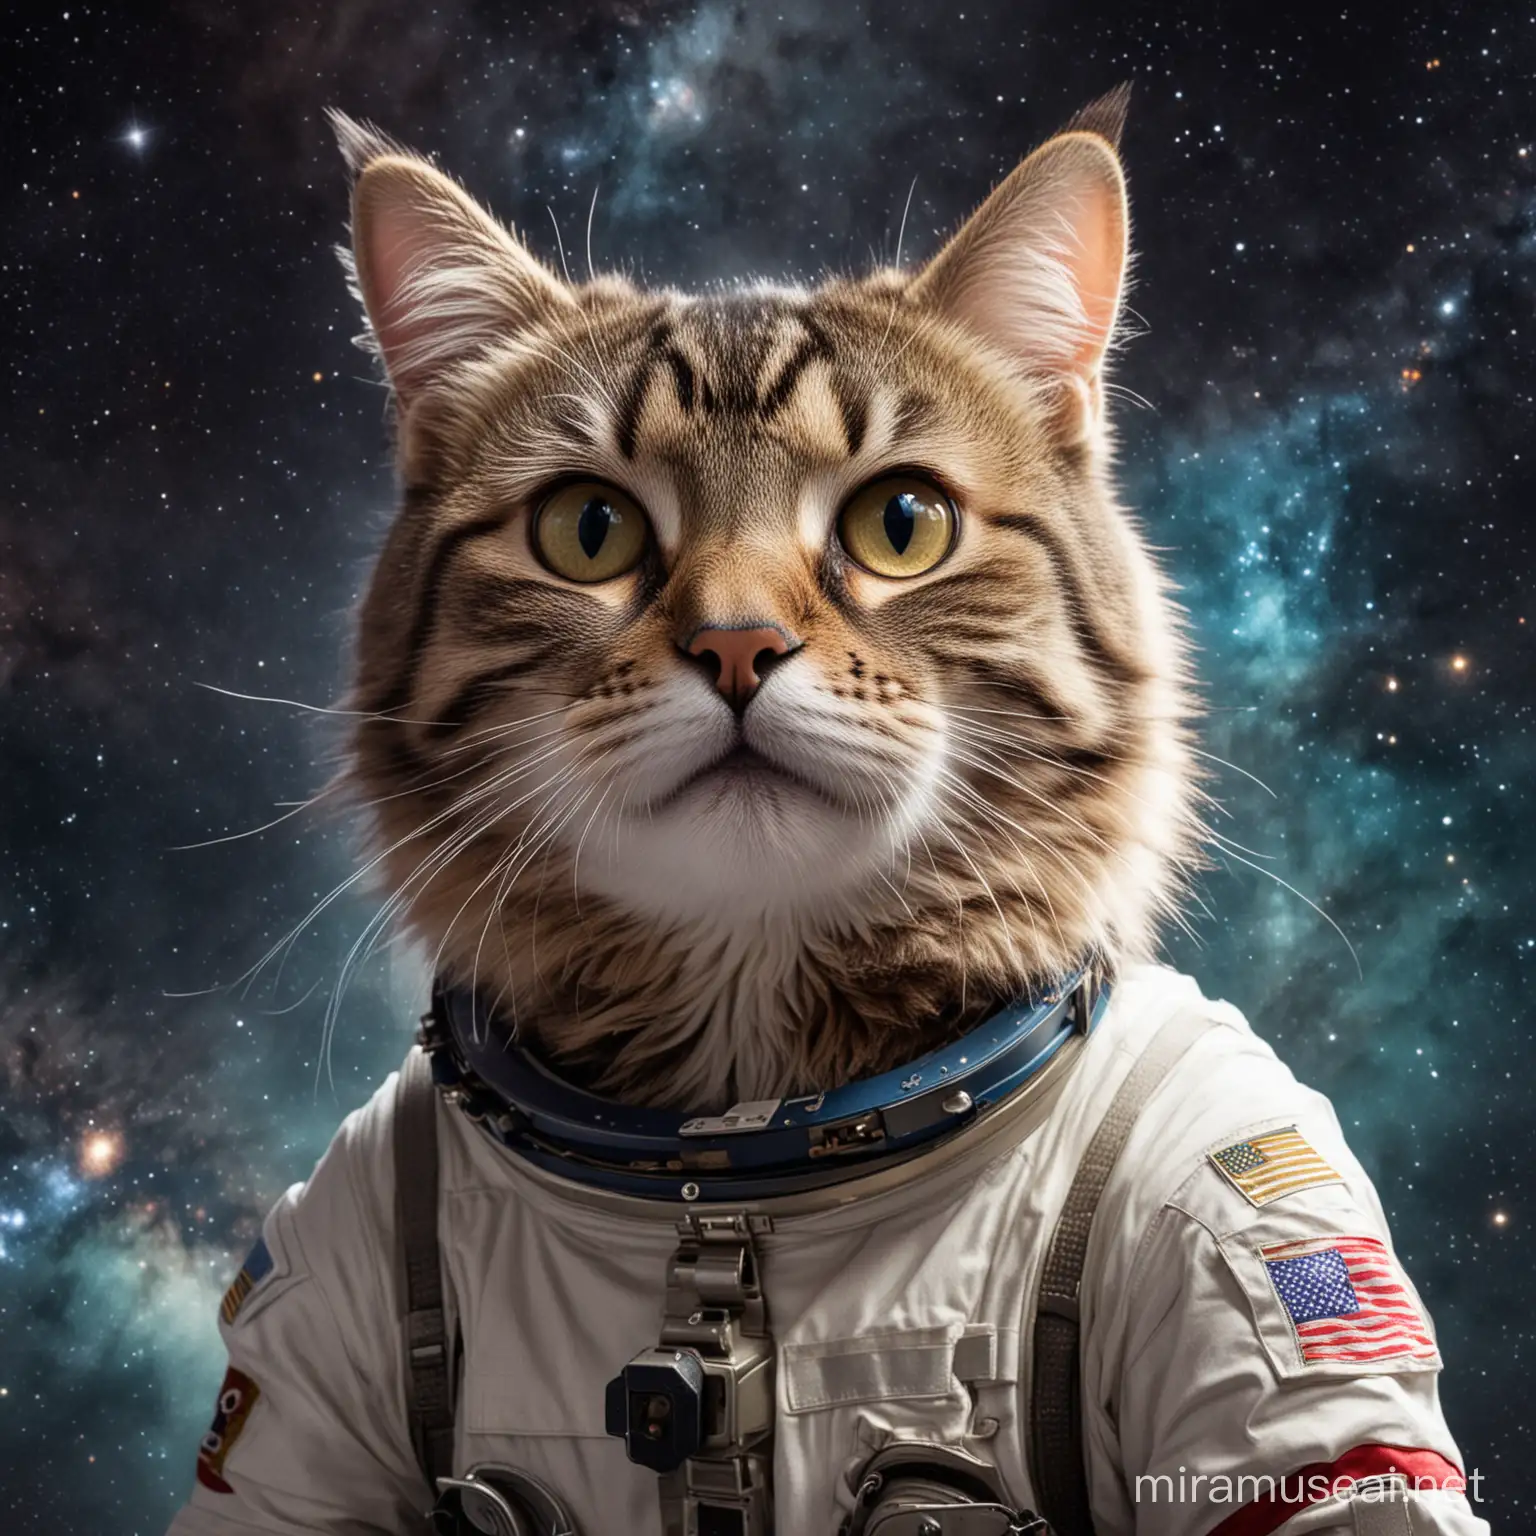 A tabby cat in space